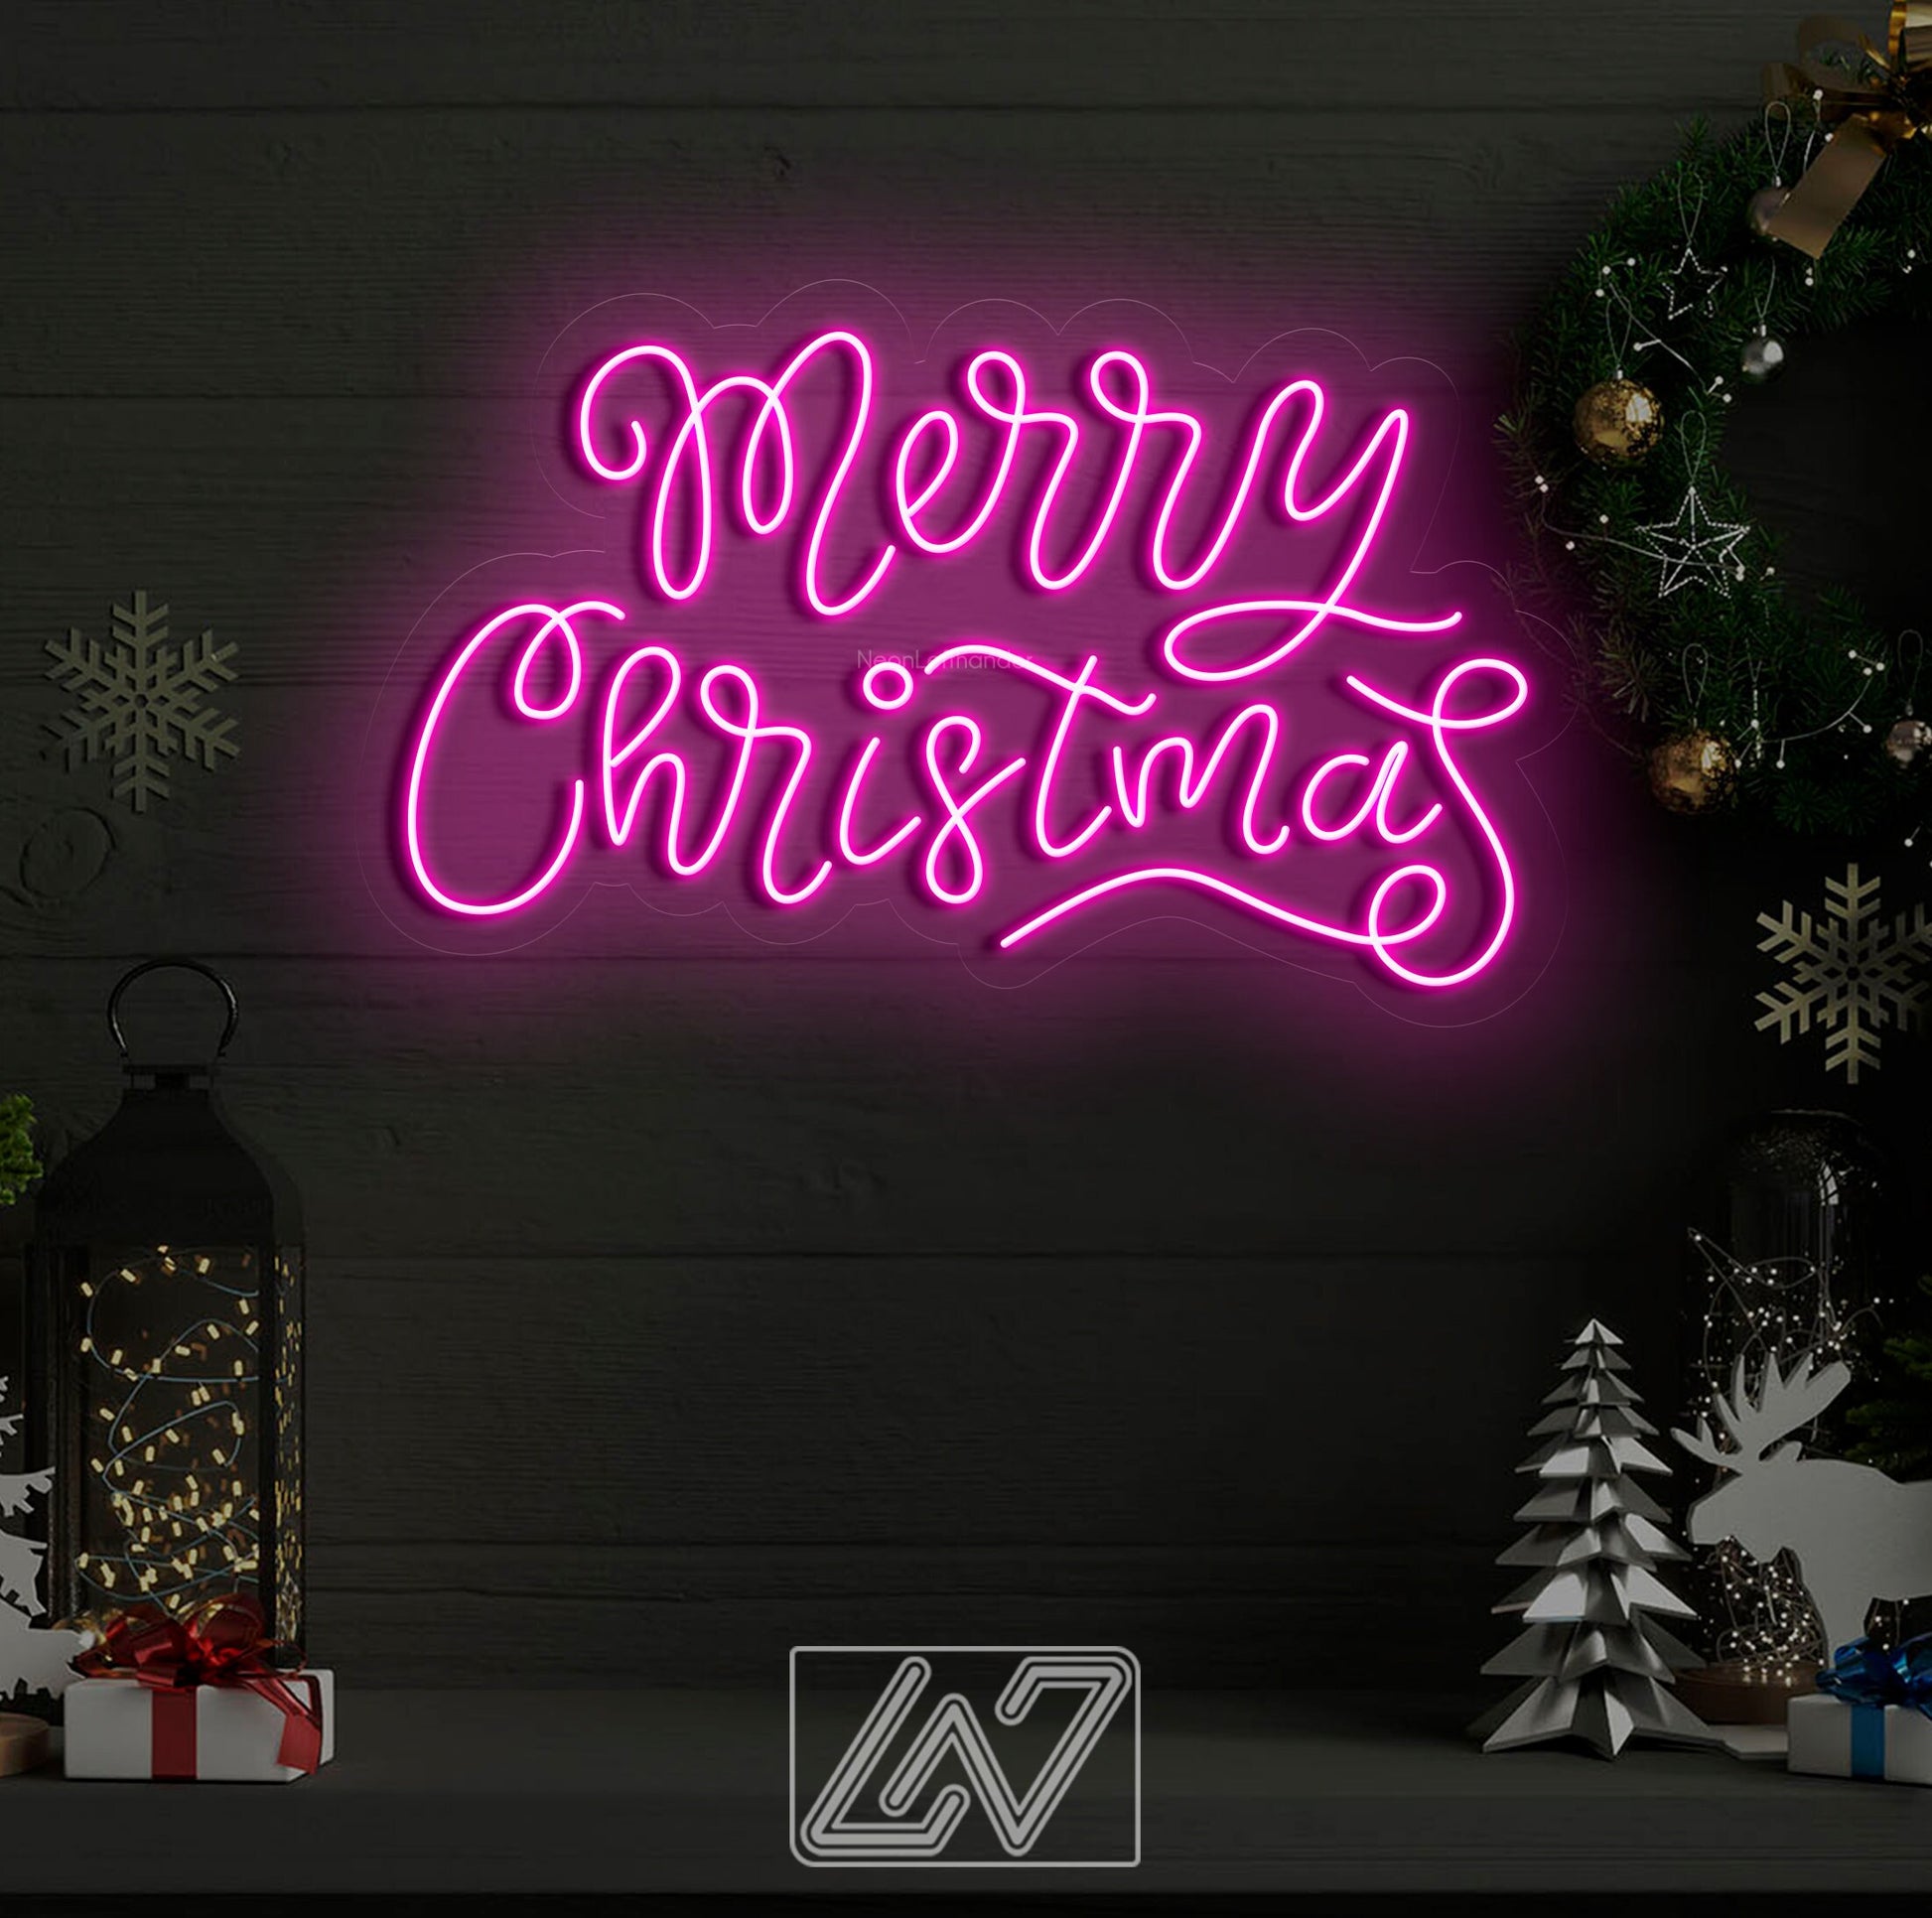 Merry Christmas - LED Neon Sign, Merry Christmas Neon Sign, New Year Neon Sign, Christmas Gift, Christmas Decoration Room